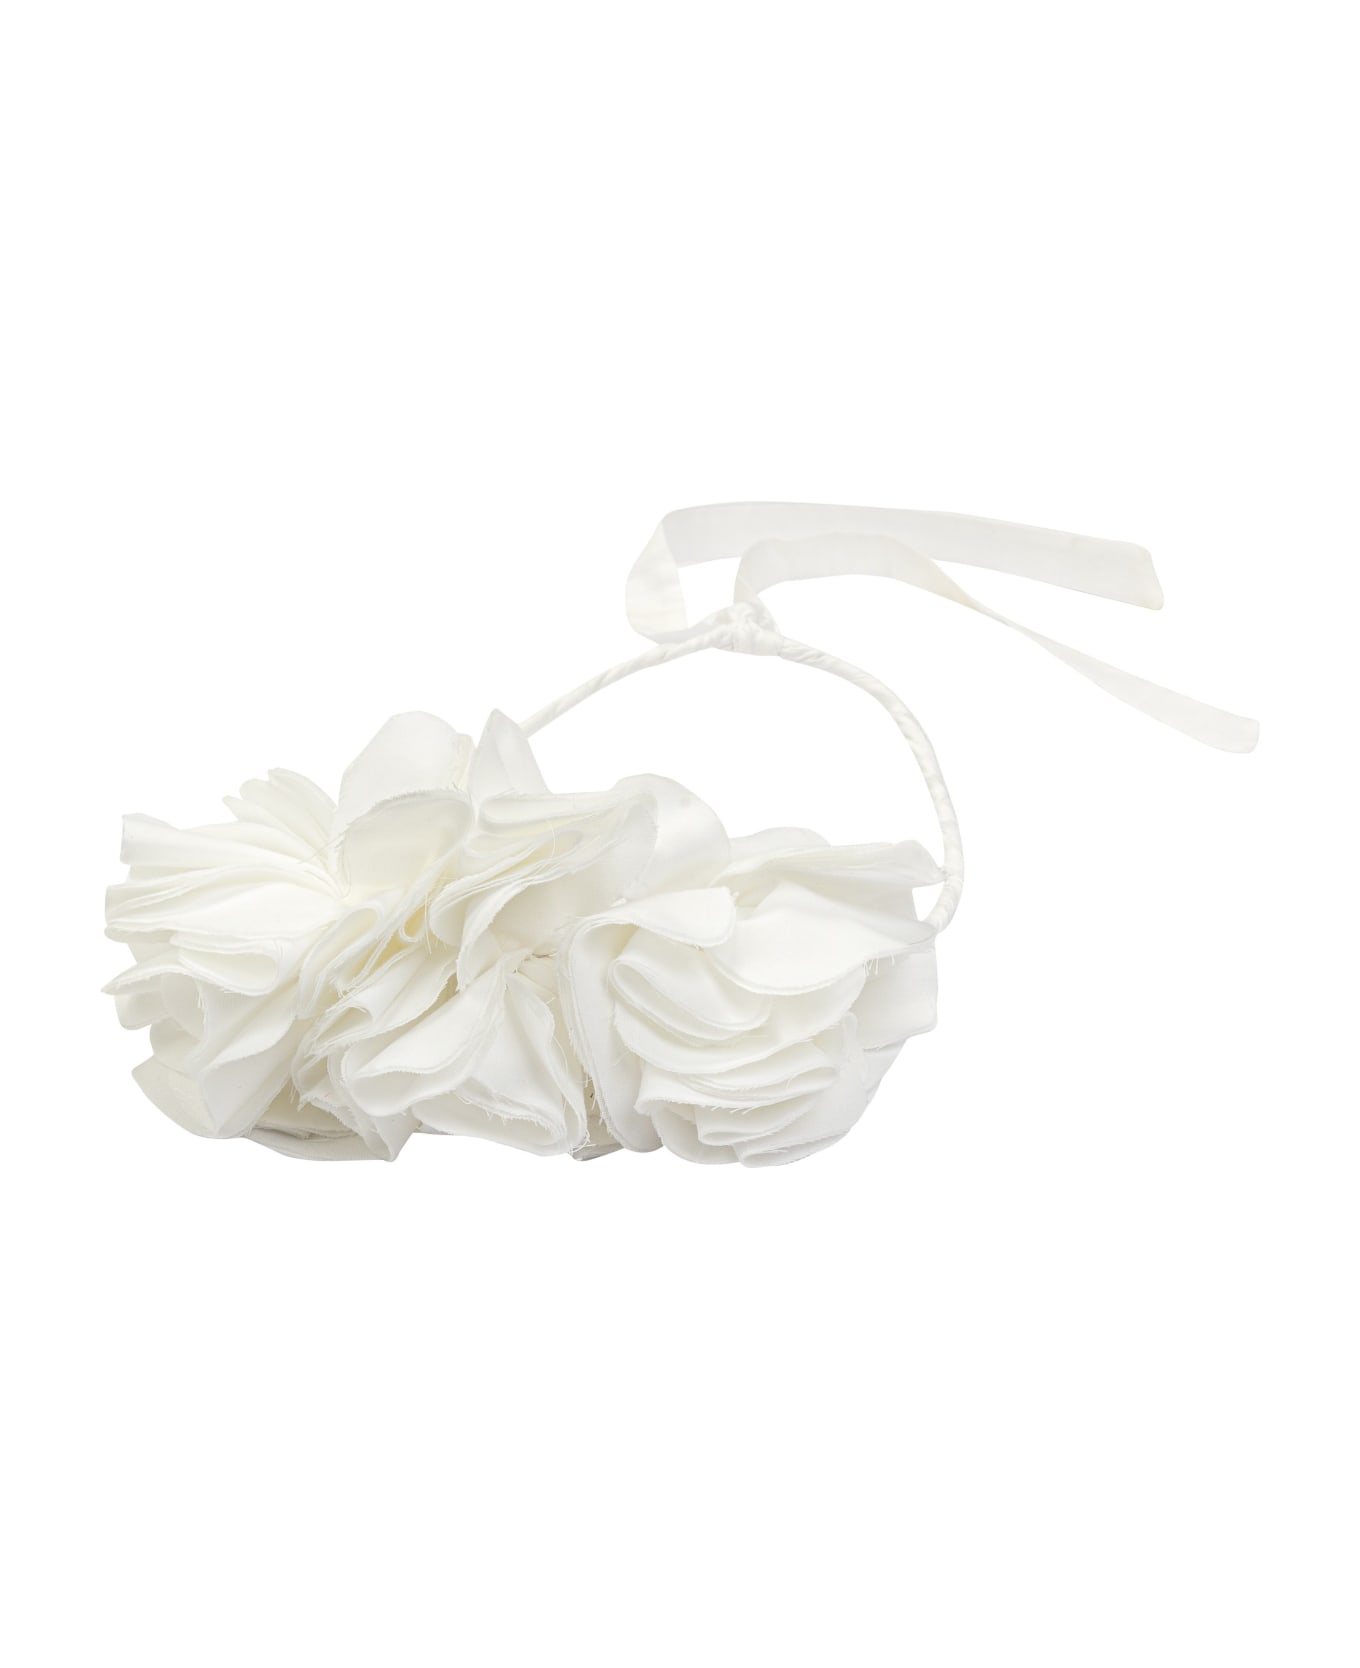 Douuod Headband With Flower Application - White アクセサリー＆ギフト